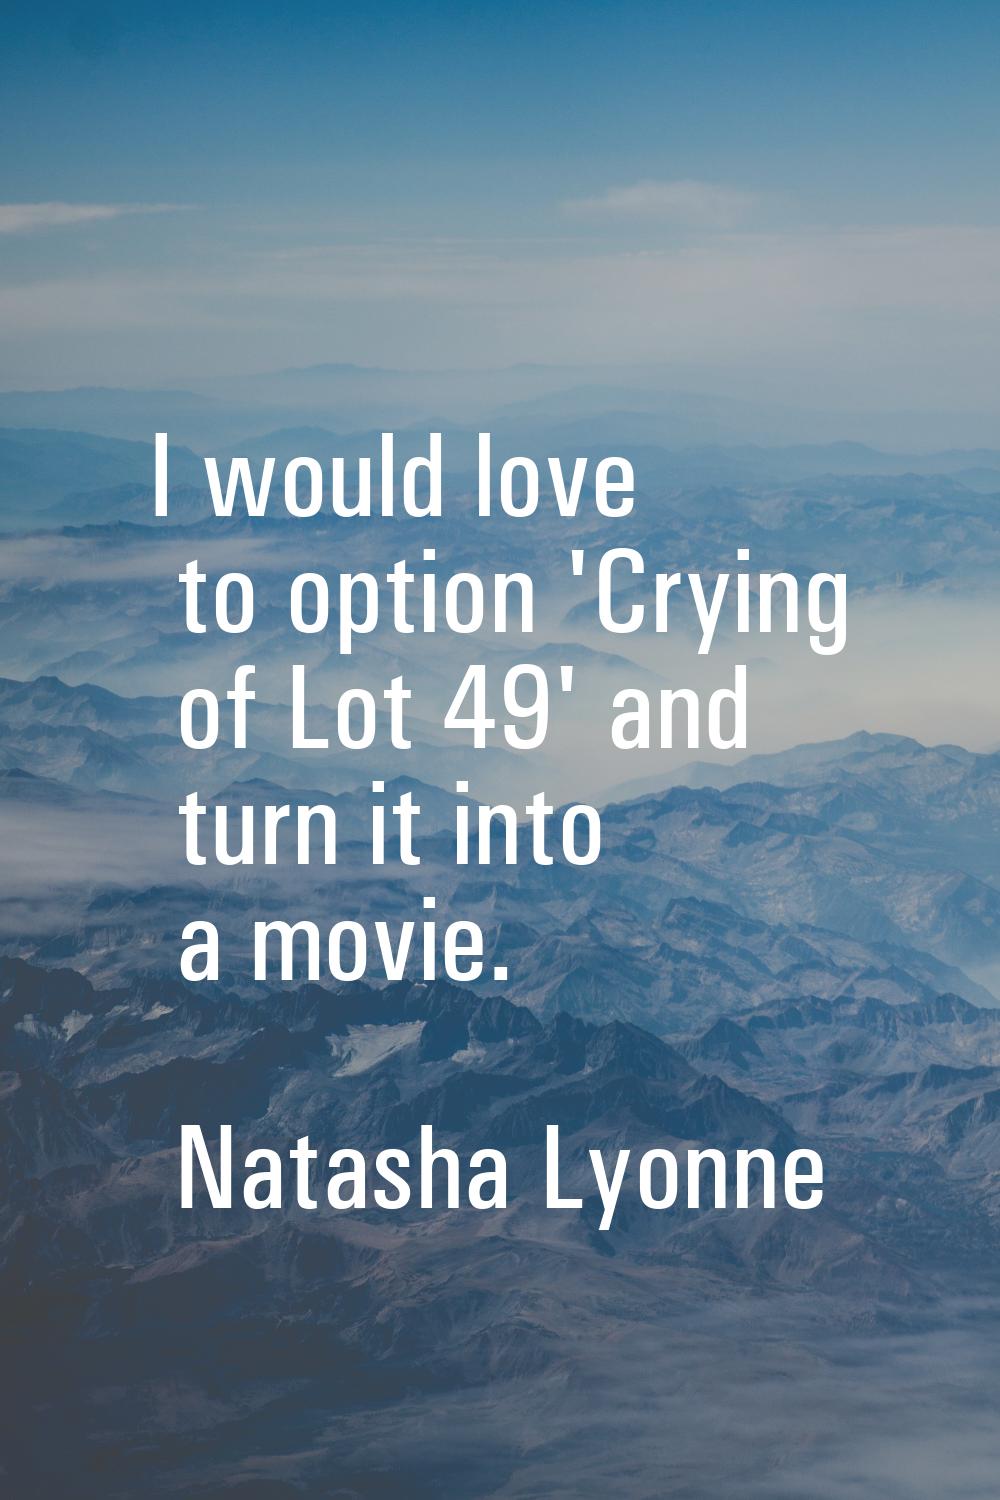 I would love to option 'Crying of Lot 49' and turn it into a movie.